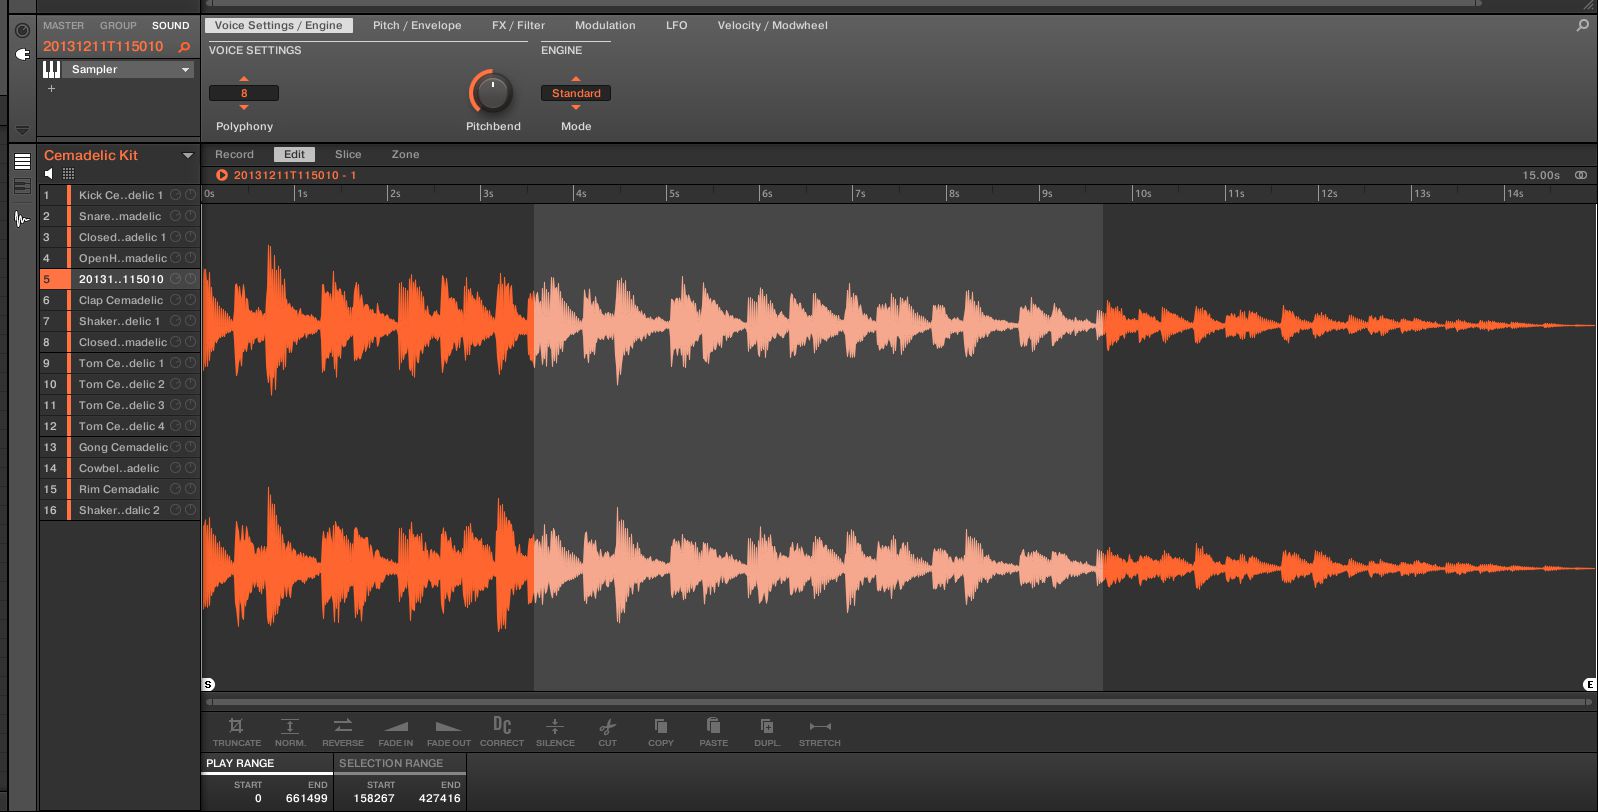 Sampling and editing audio is now a breeze.